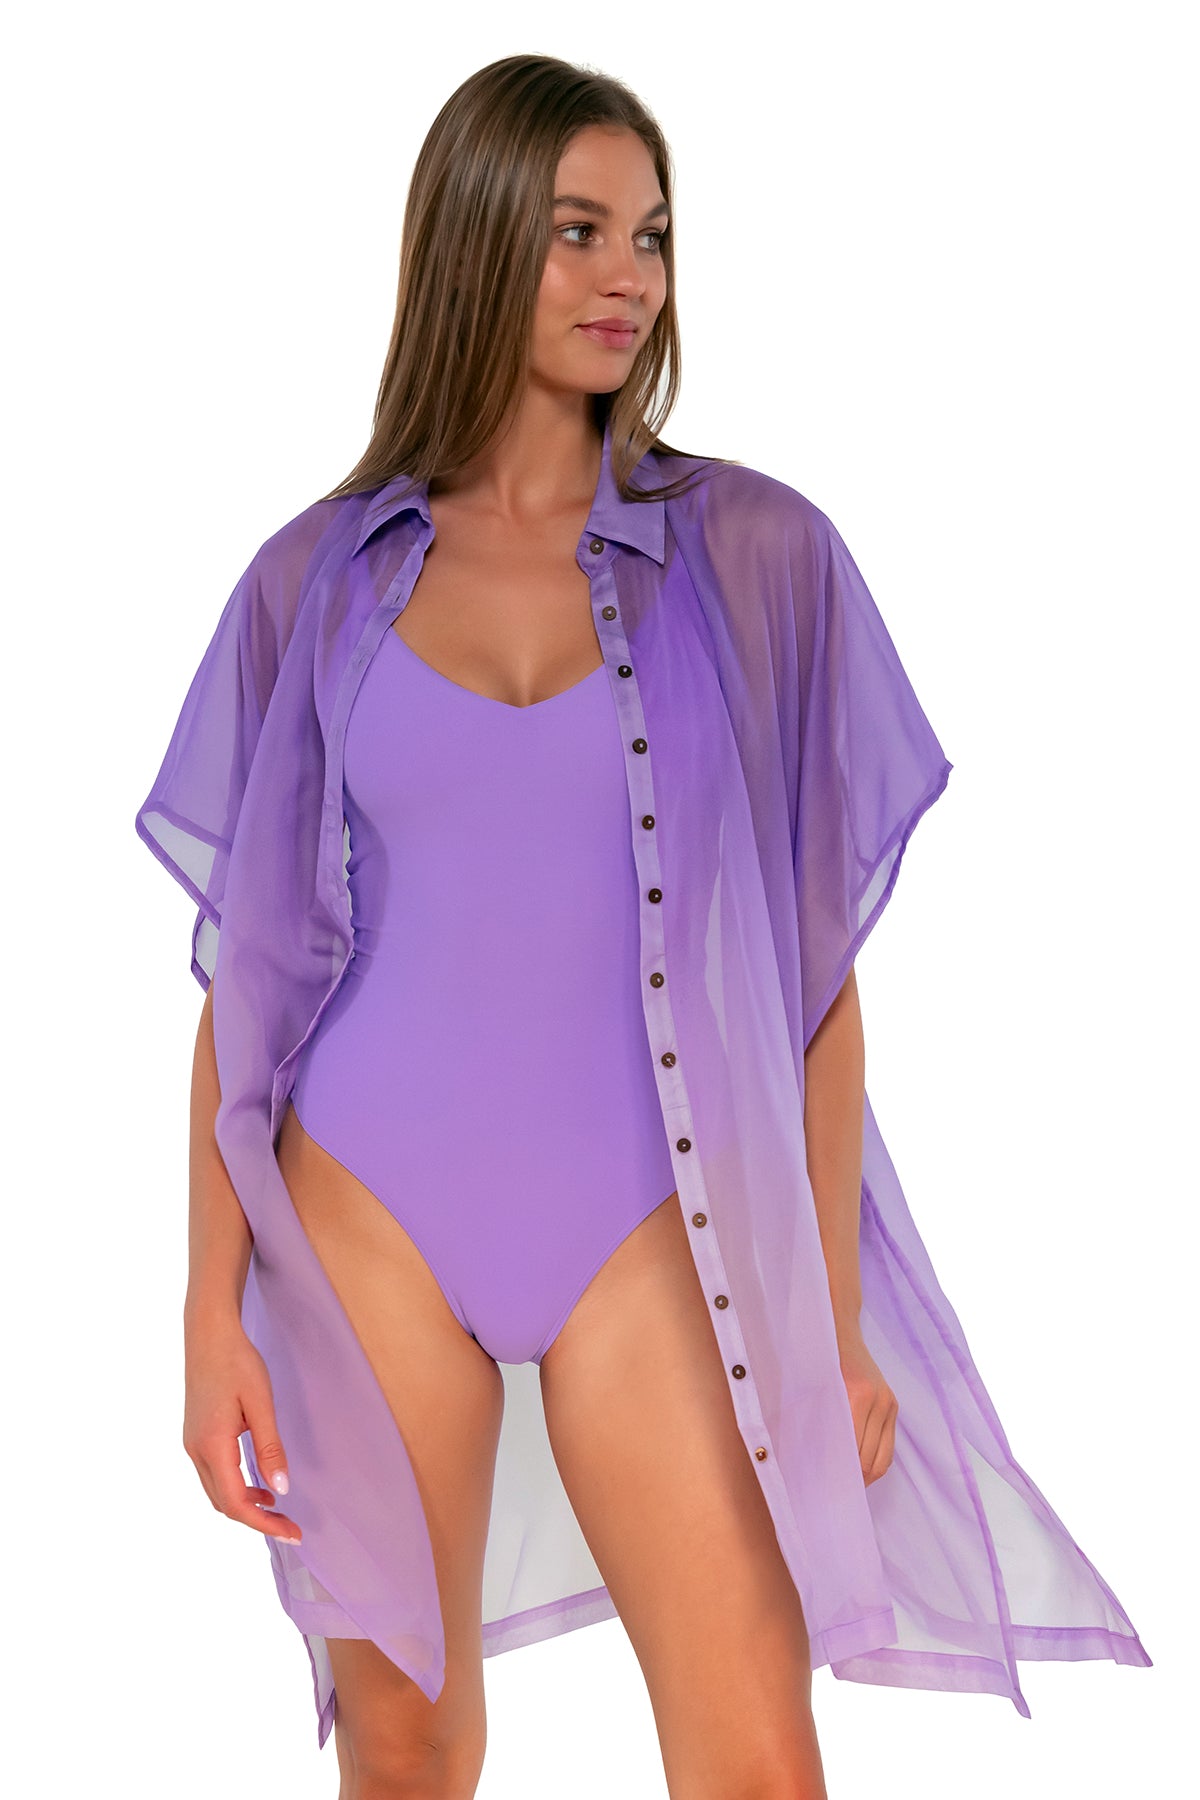 Front Front view of Sunsets Passion Flower Shore Thing Tunic worn as an open shirt